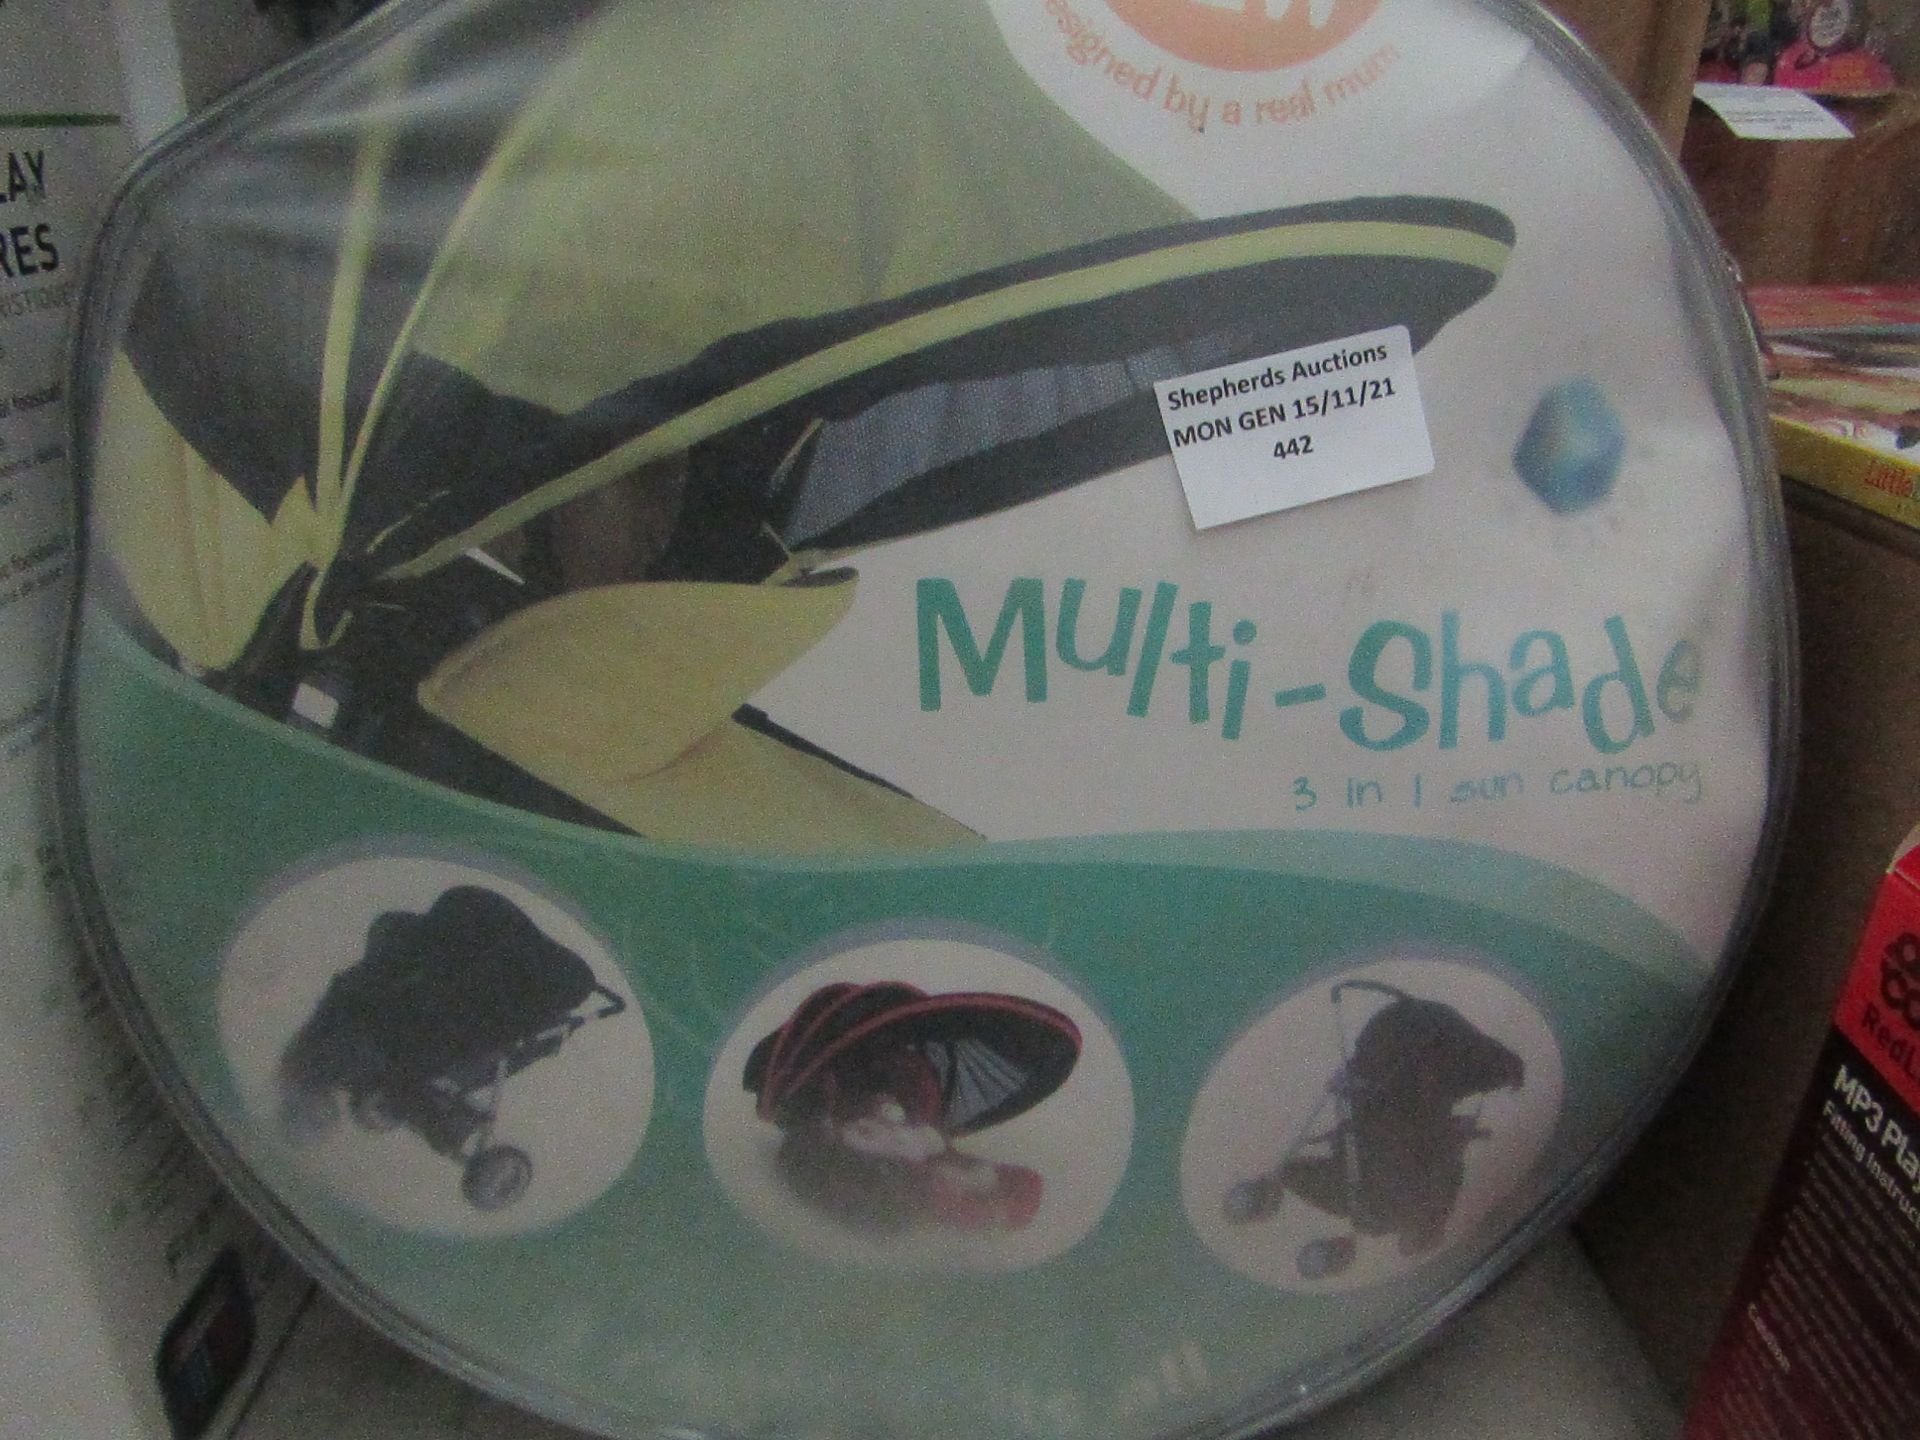 Whole New World - Multi-Shade 3-IN-1 Sun Canopy ( Universal ) - Unused & Packaged.